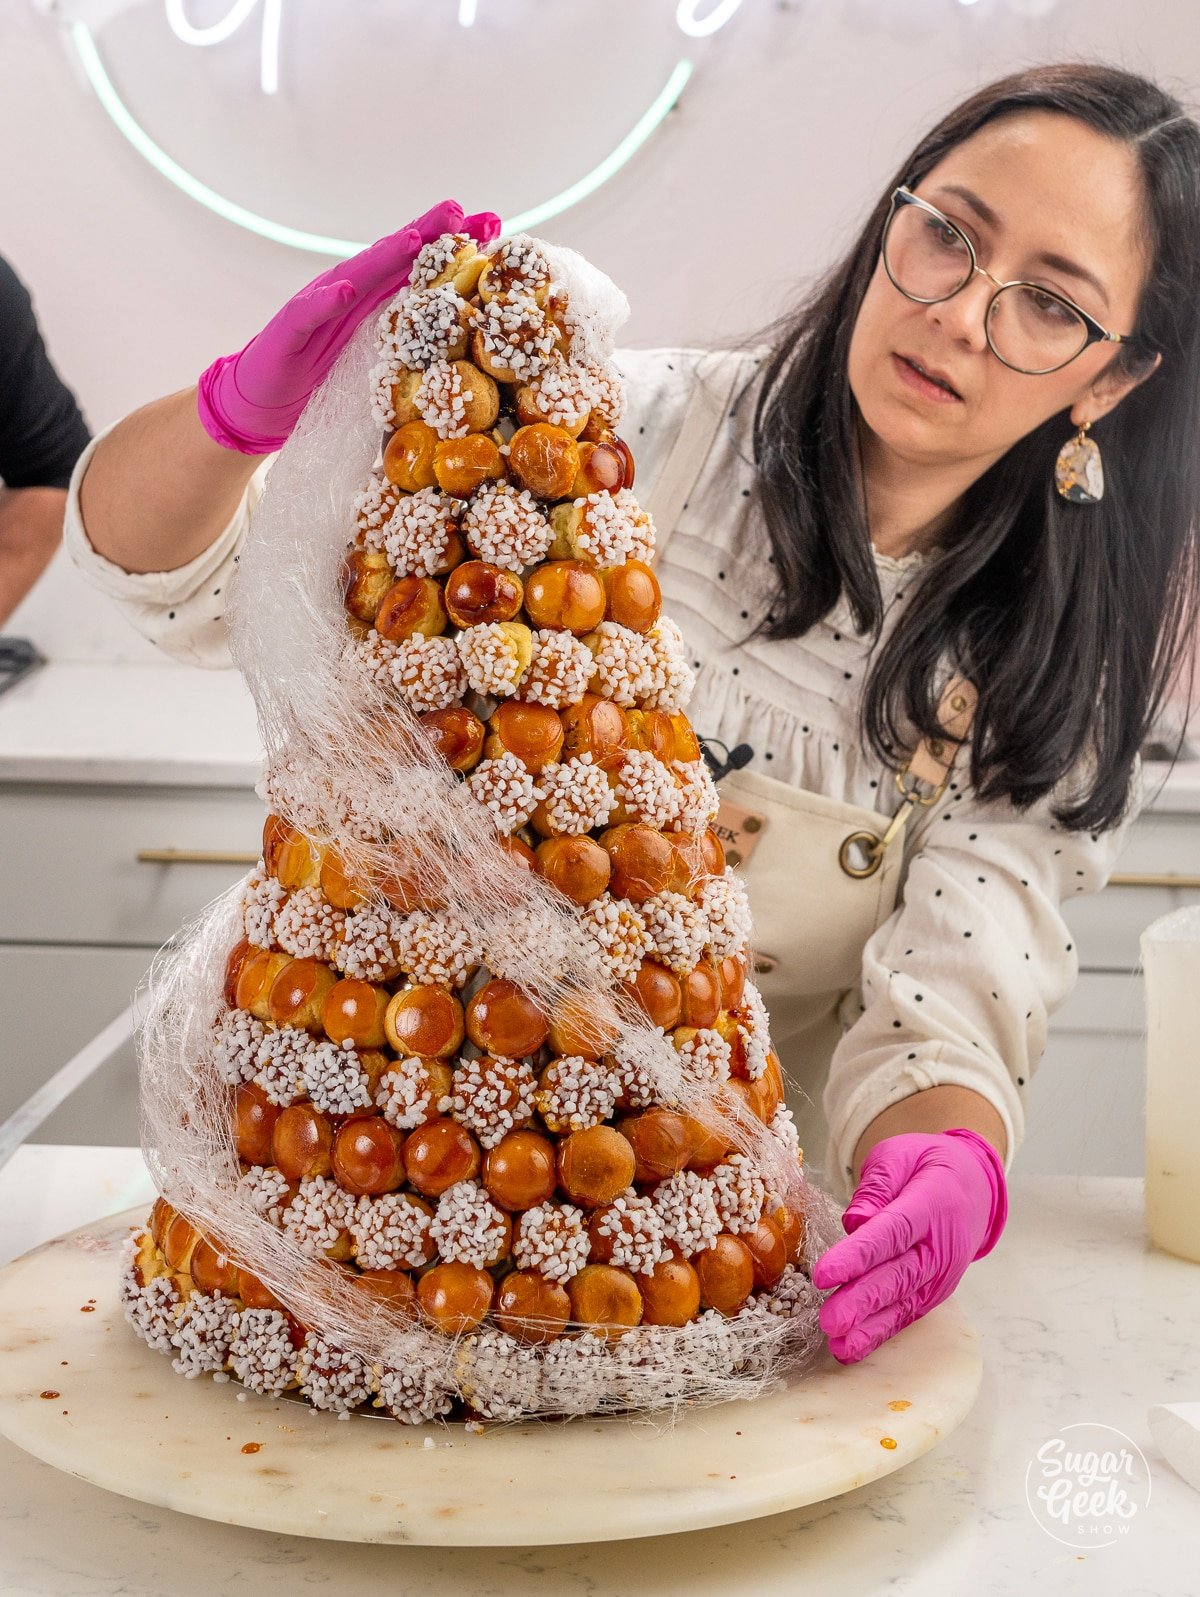 woman wearing pink gloves using hands to assemble a croquembouche